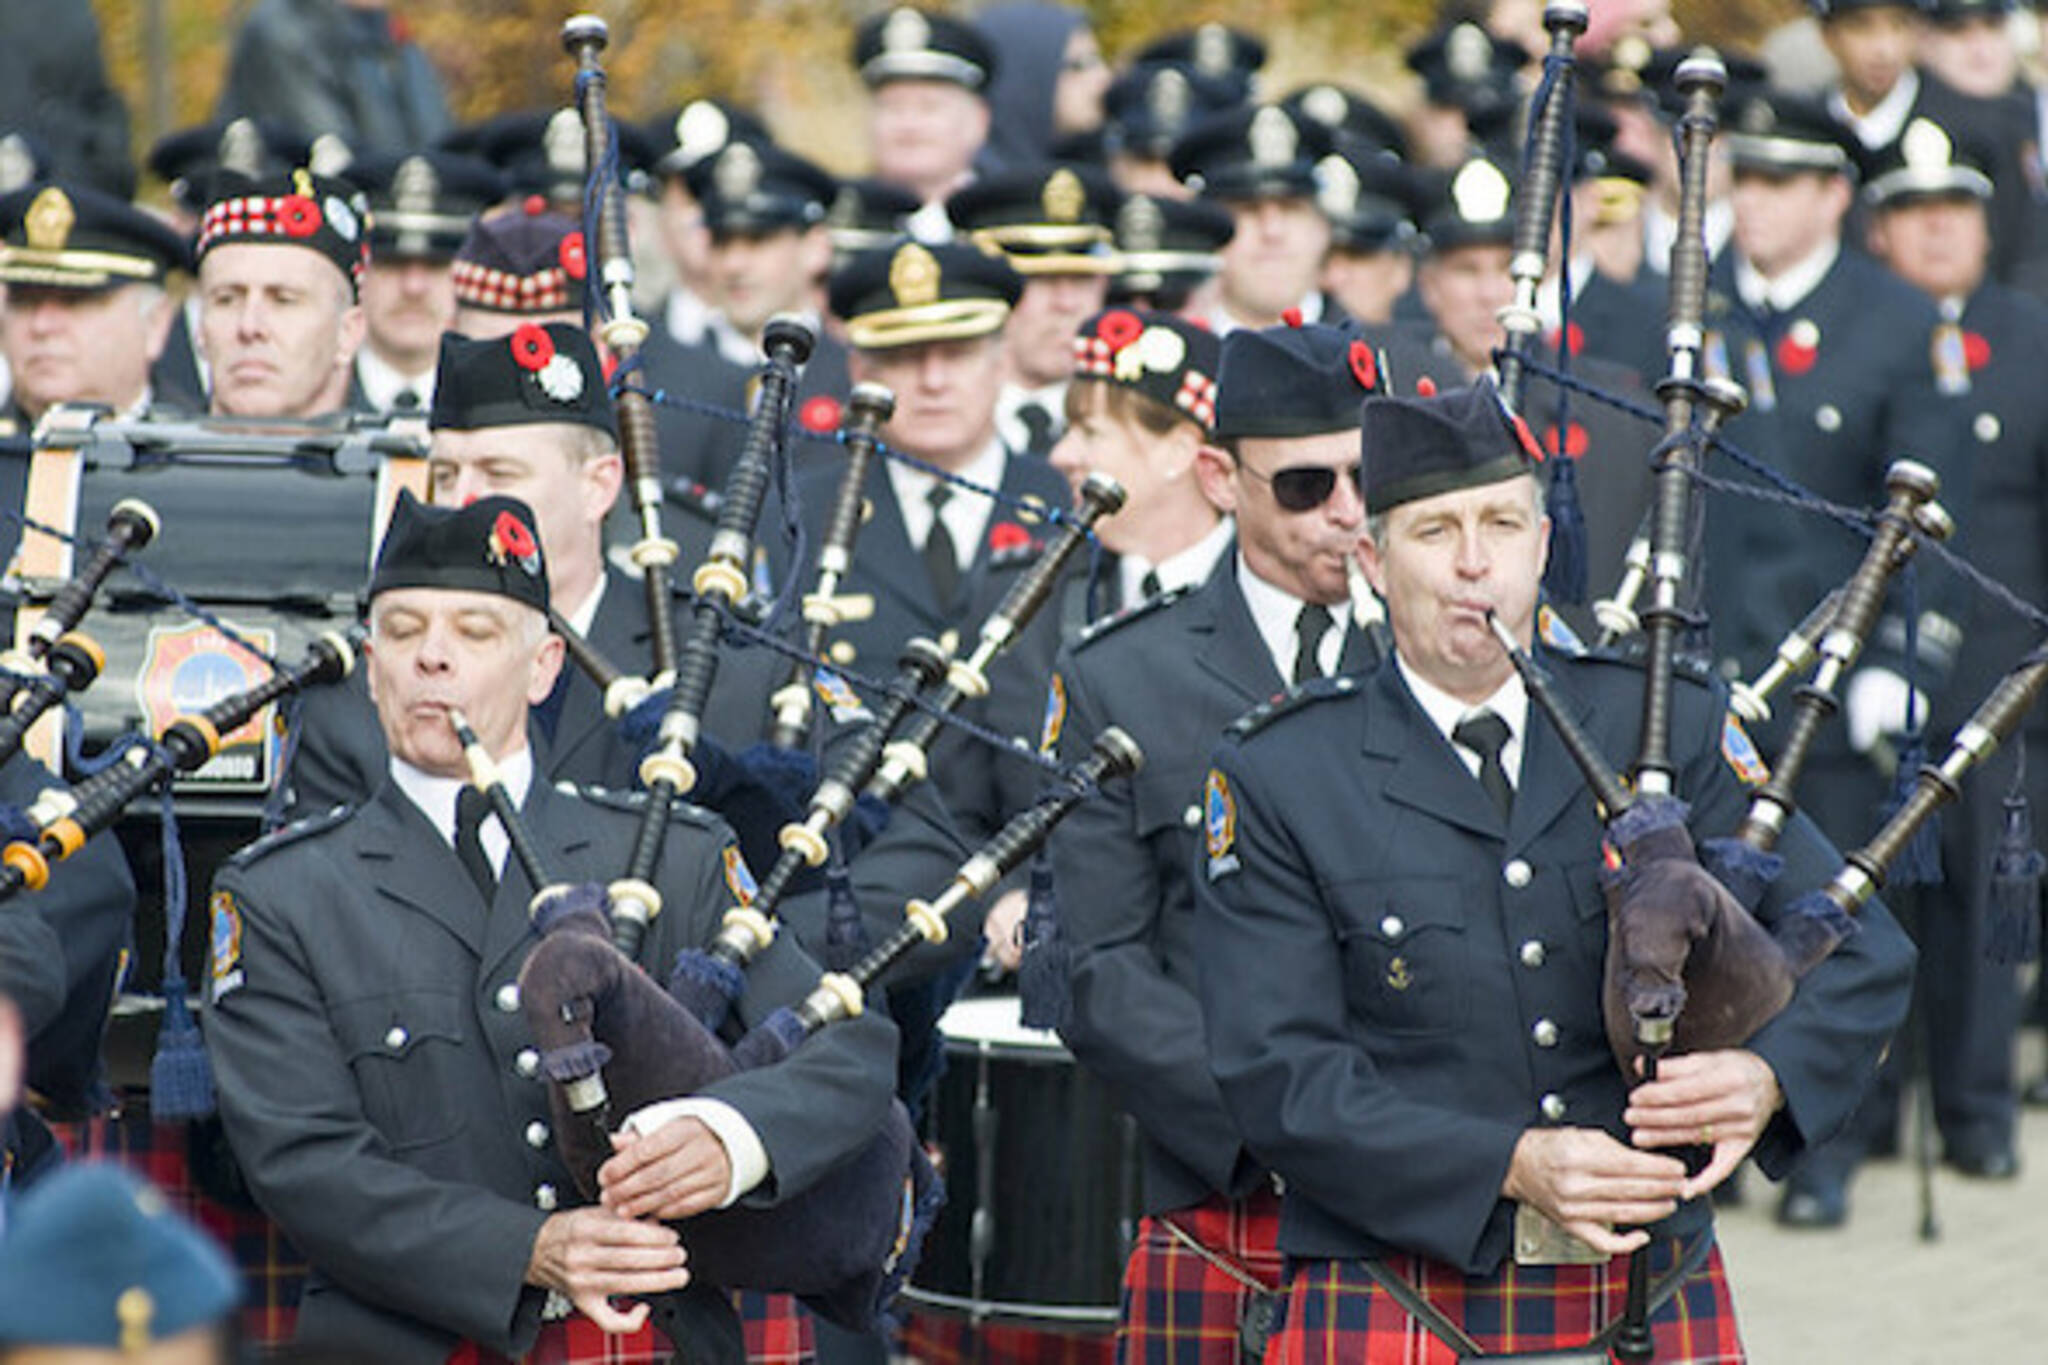 bag pipers remembrance day toronto